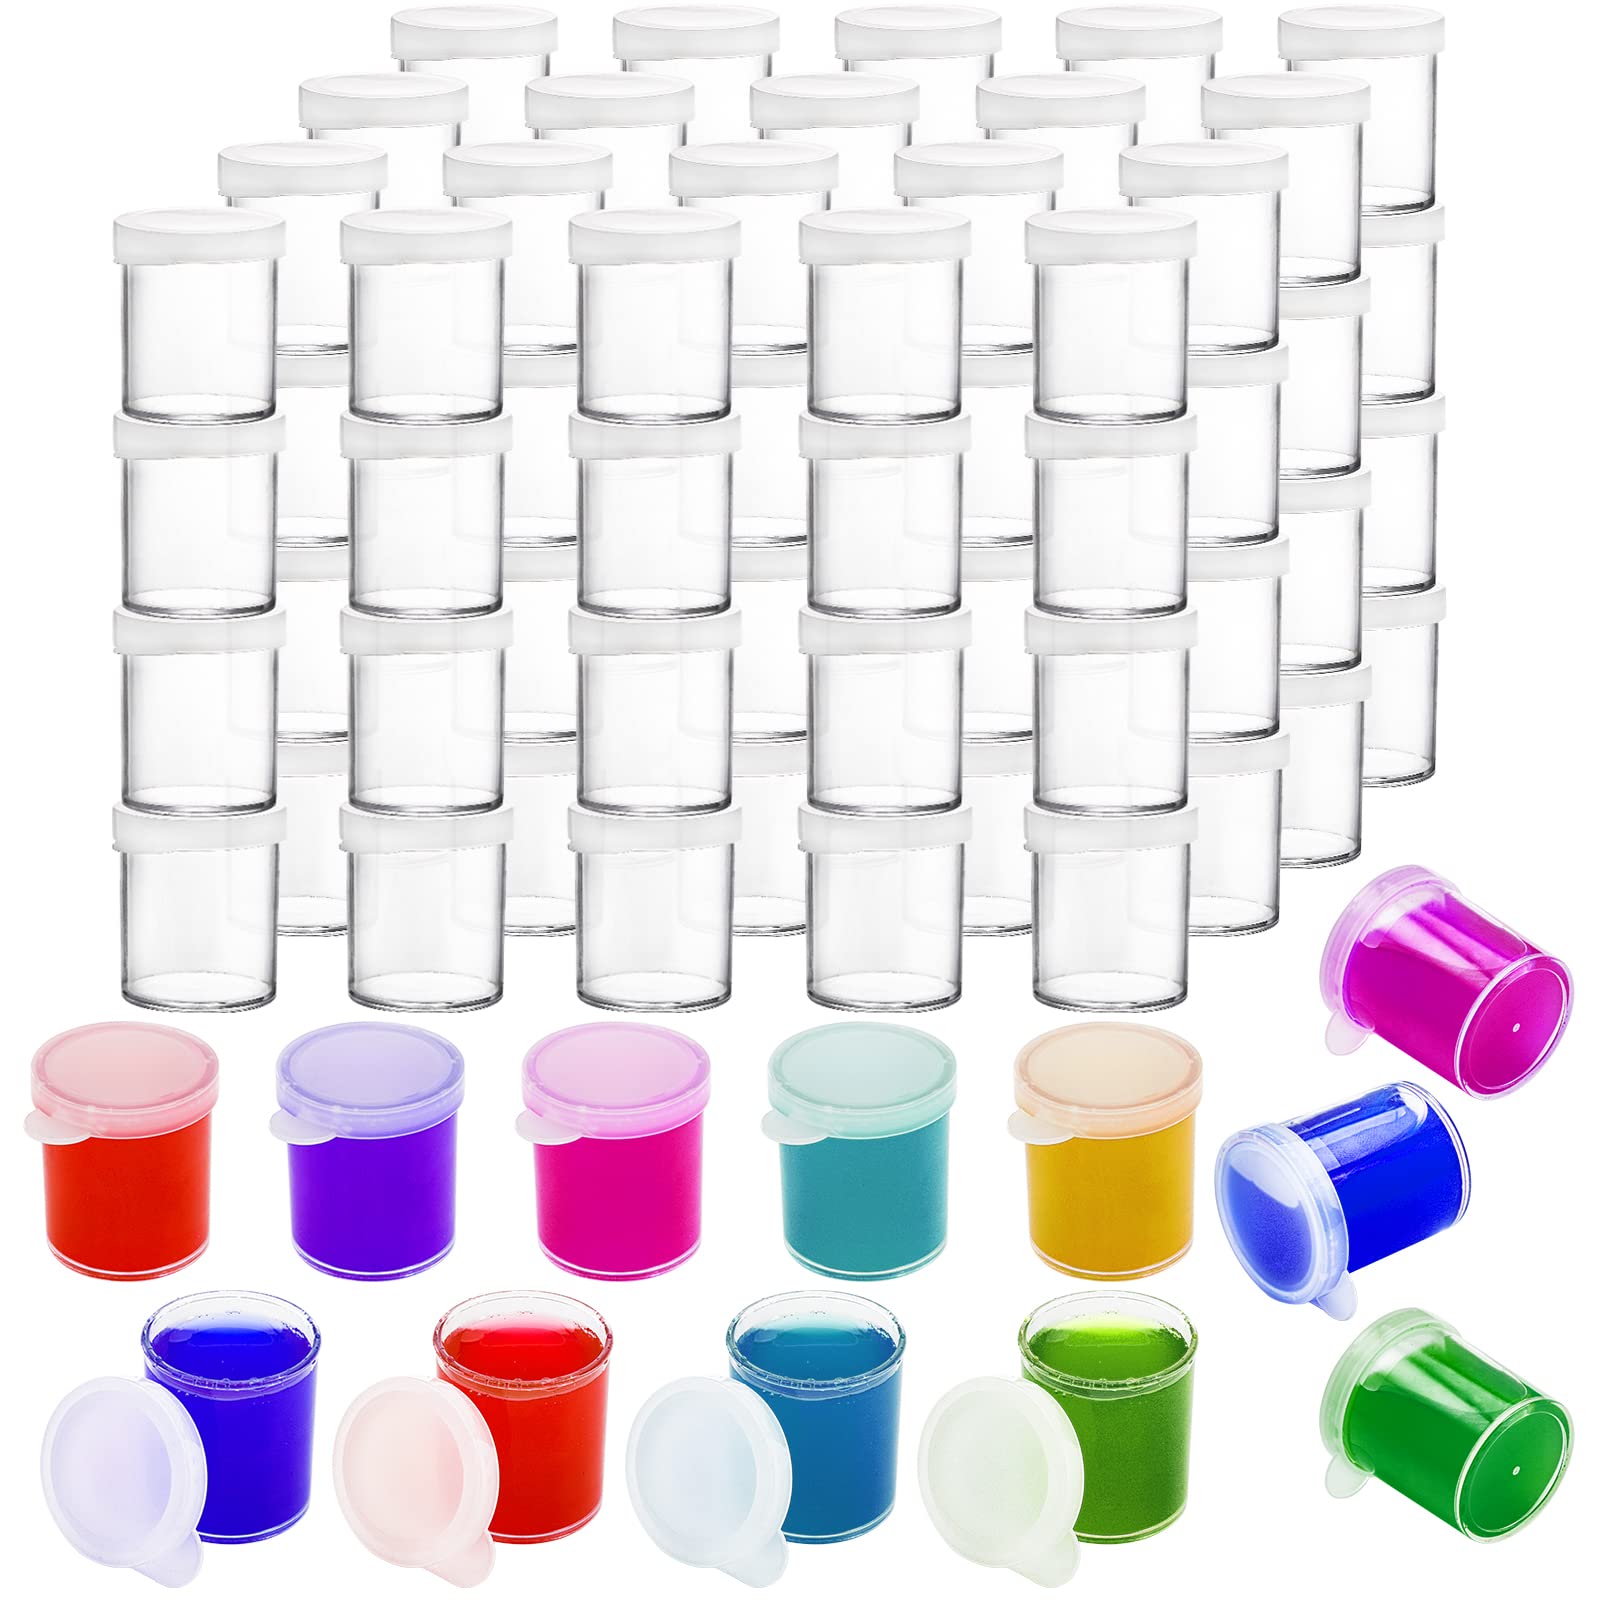 Wholesale Tiny Plastic Containers With Lids: Small Plastic Storage